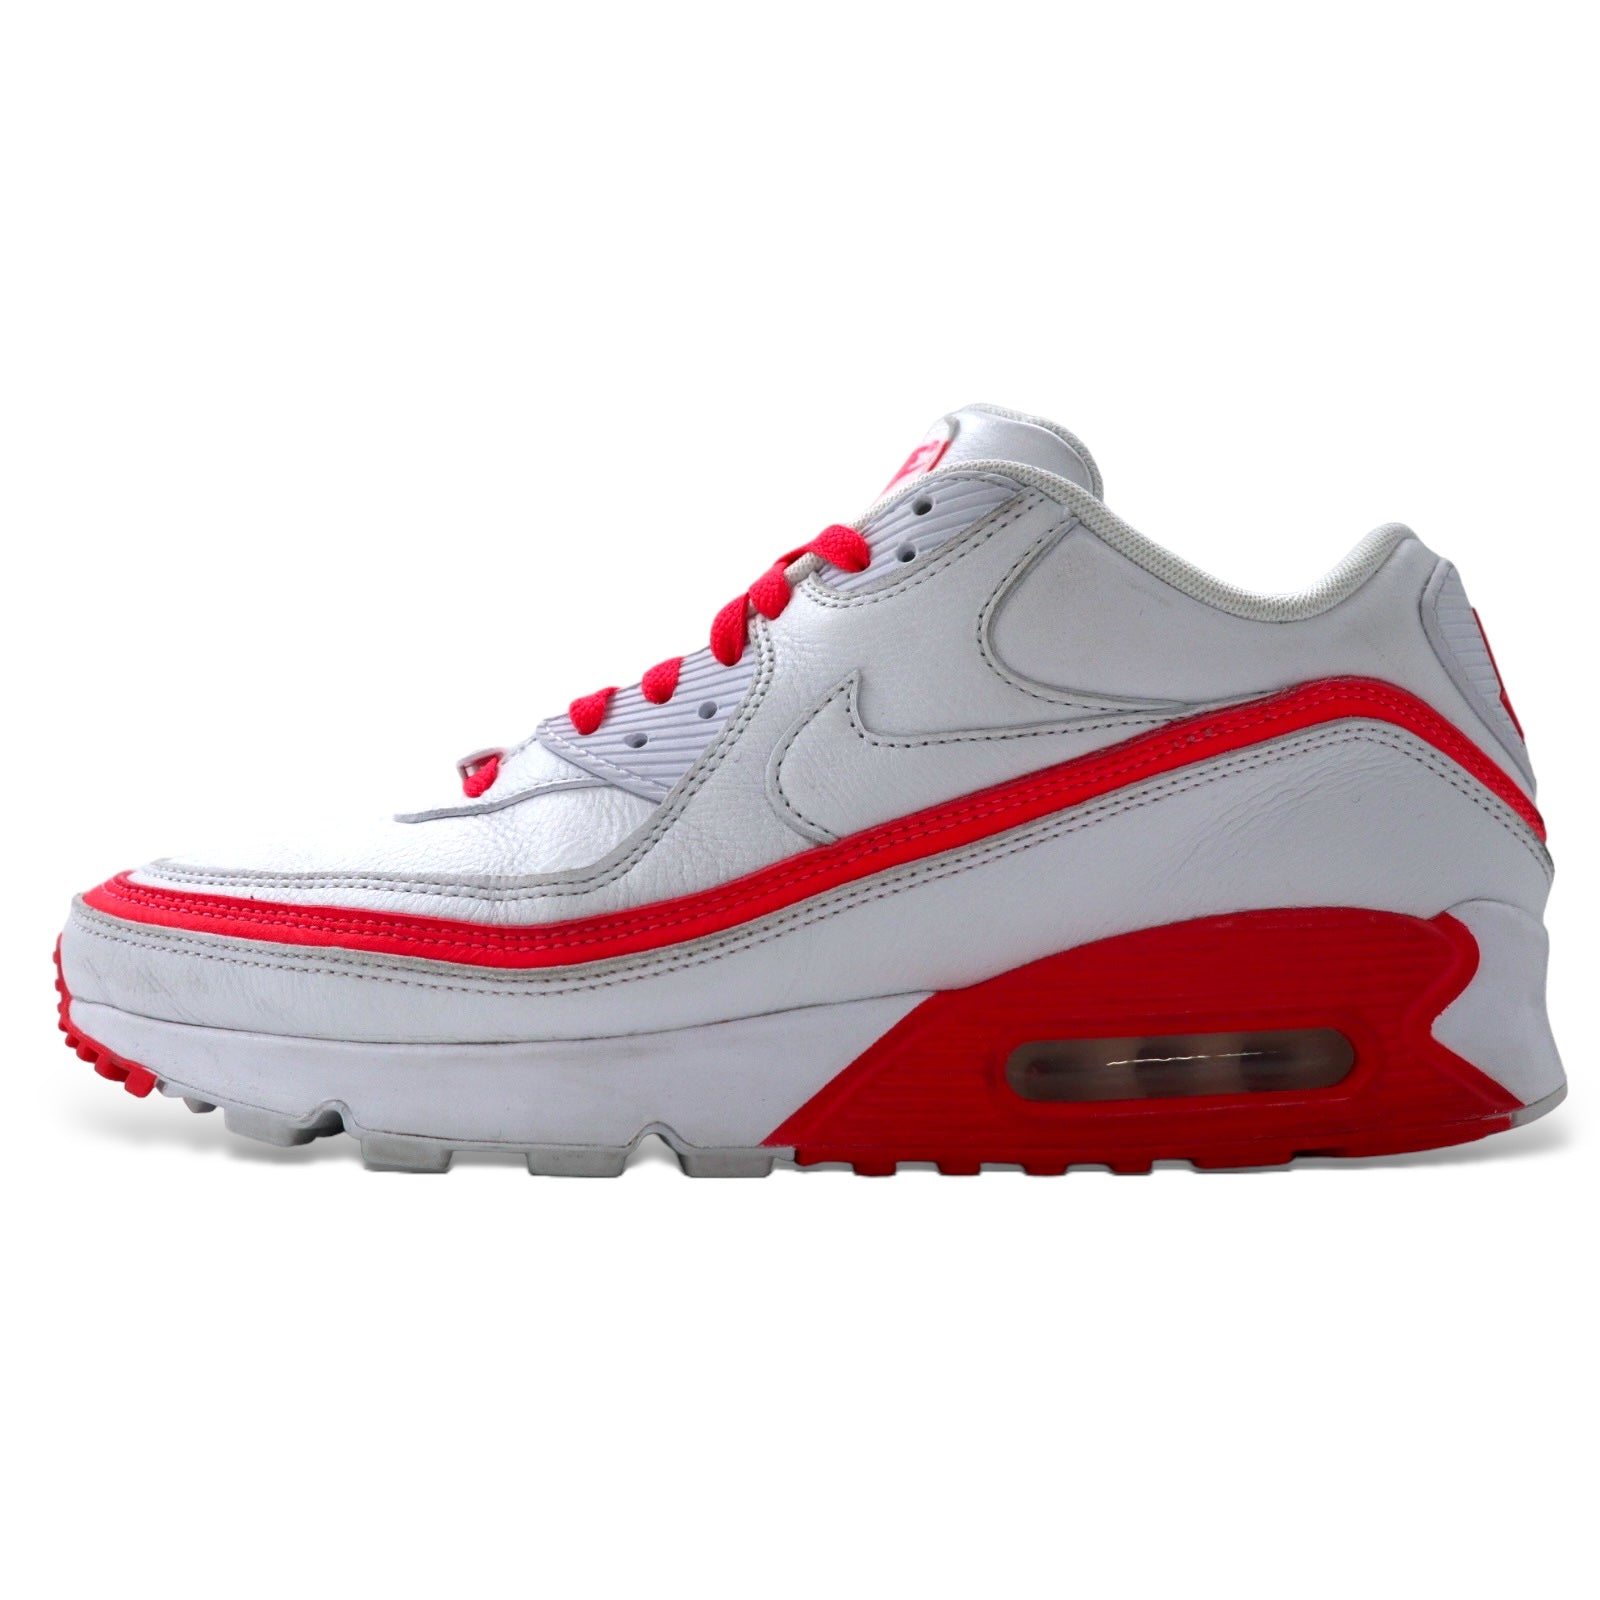 NIKE × UNDEFETED Air Max 90 SNEAKERS US11 White Air Max 90 ...